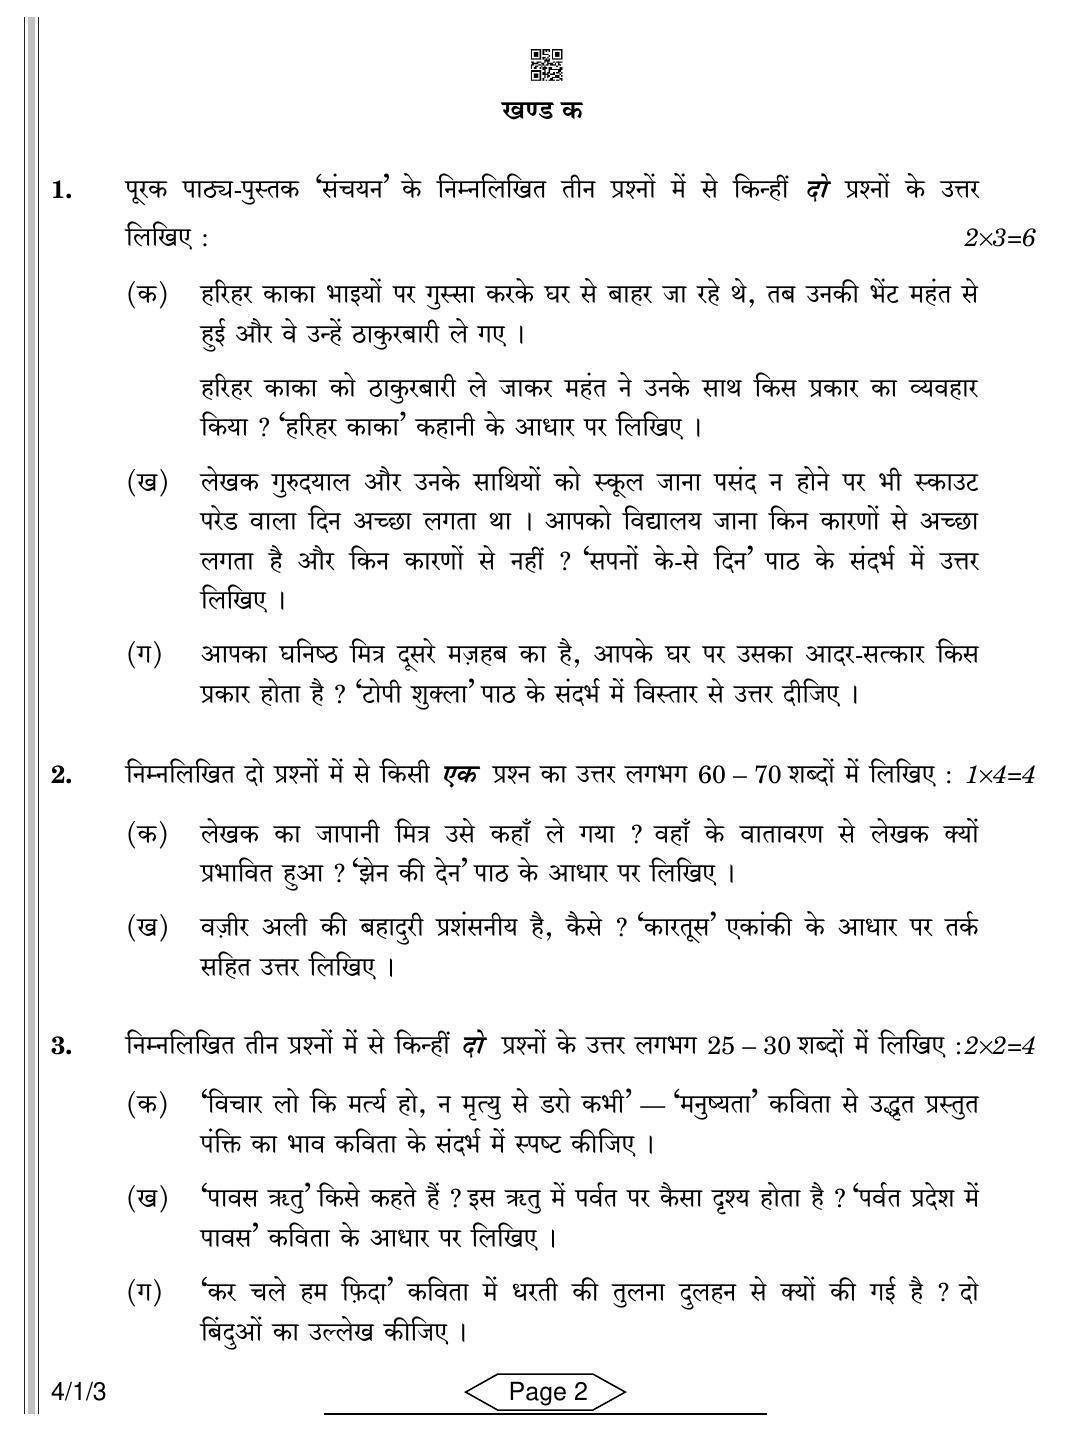 CBSE Class 10 4-1-3 Hindi B 2022 Question Paper - Page 2